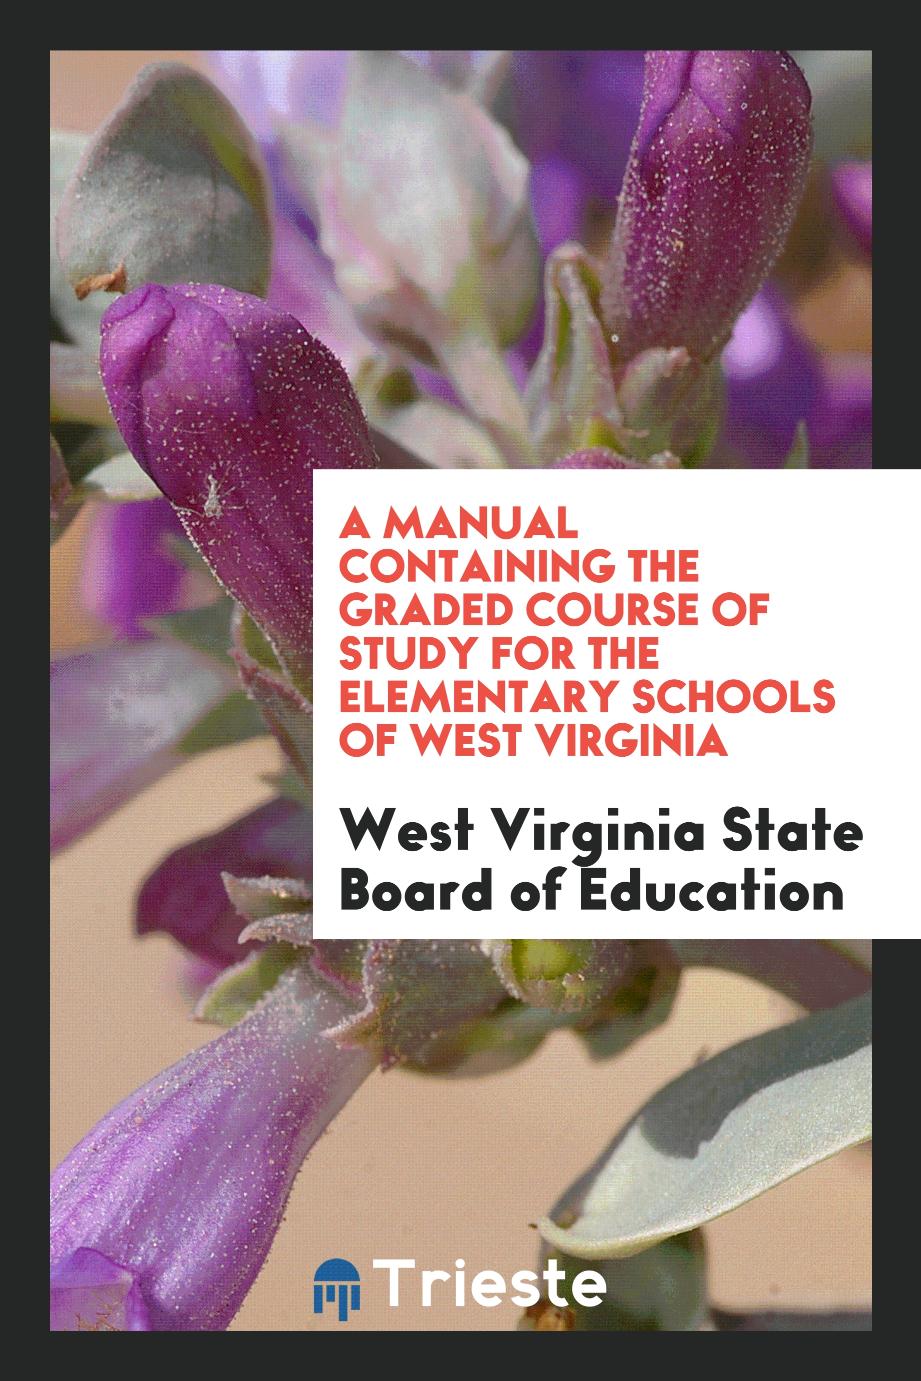 A manual containing the graded course of study for the elementary schools of West Virginia